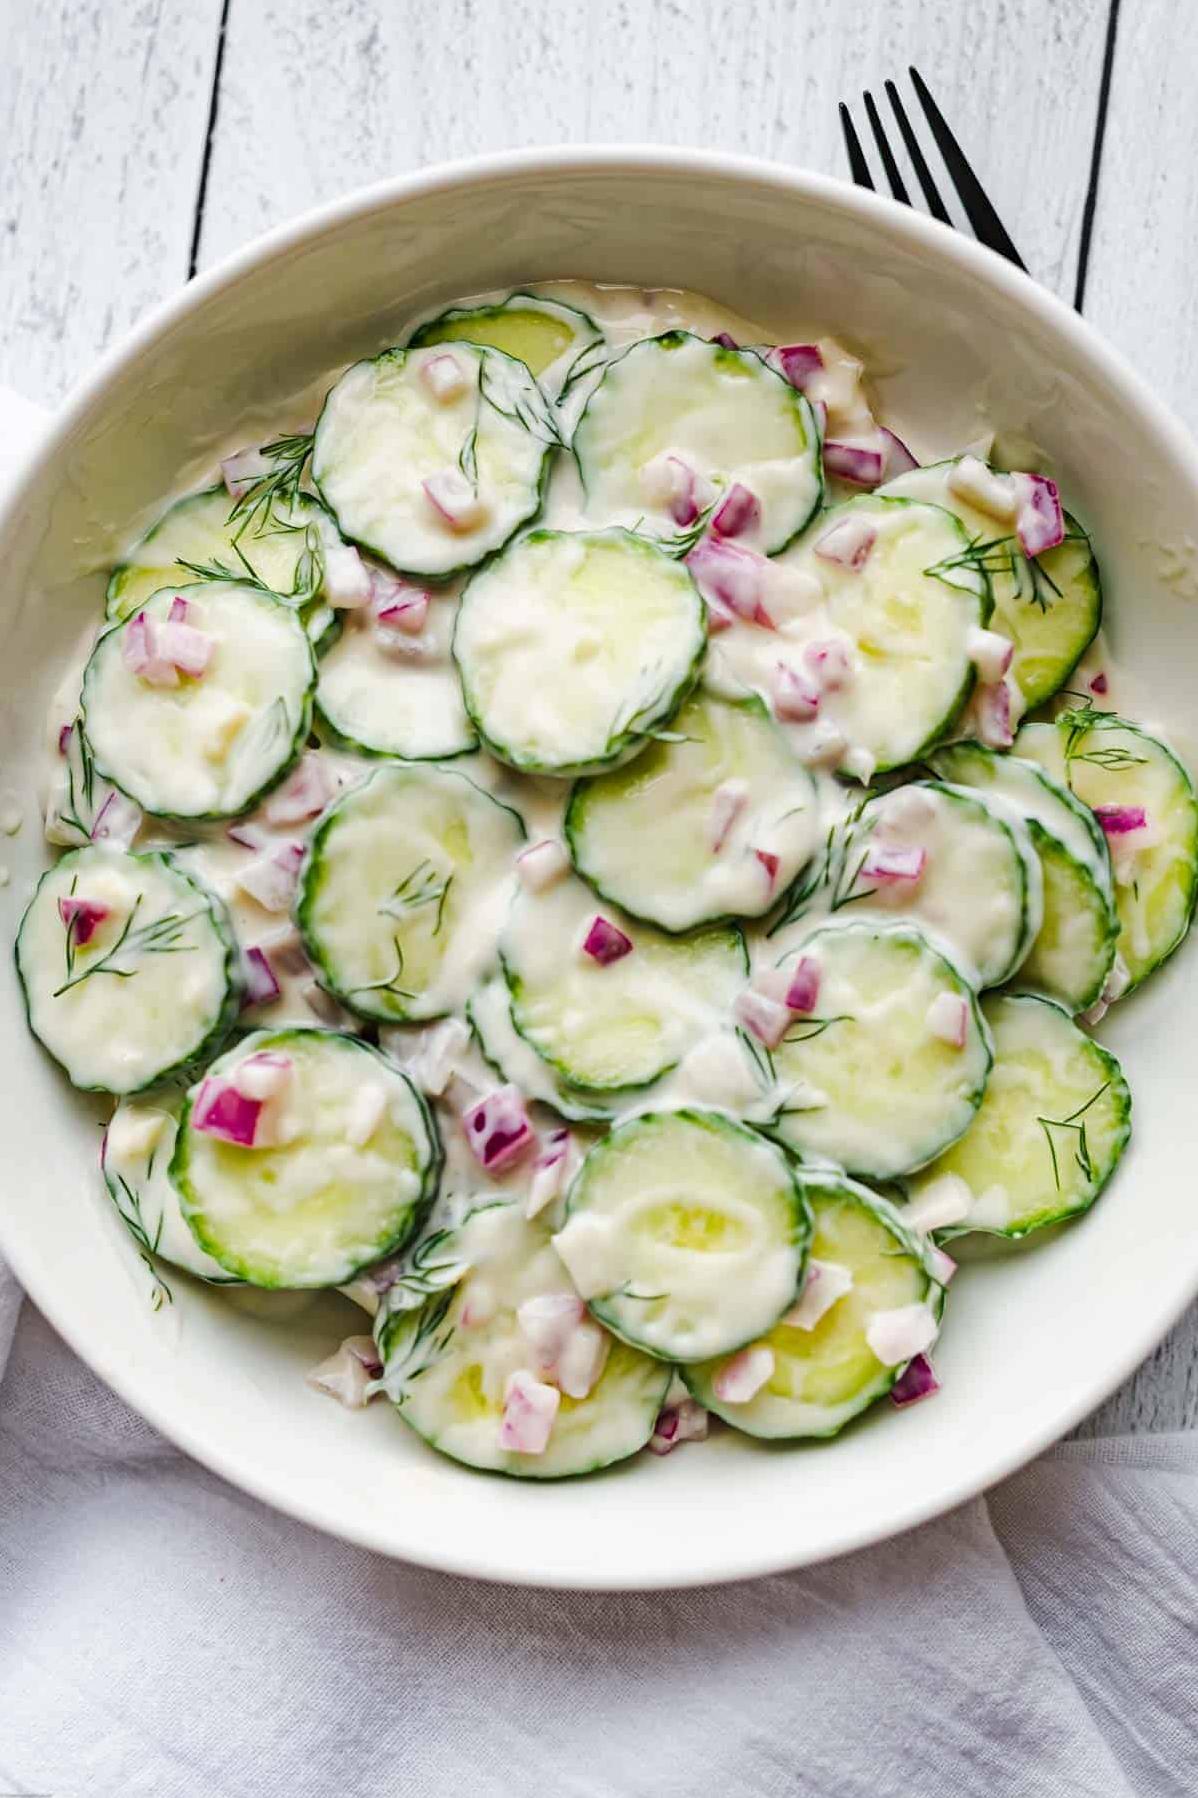  Say goodbye to boring salads with this refreshing and flavorful twist on a classic.